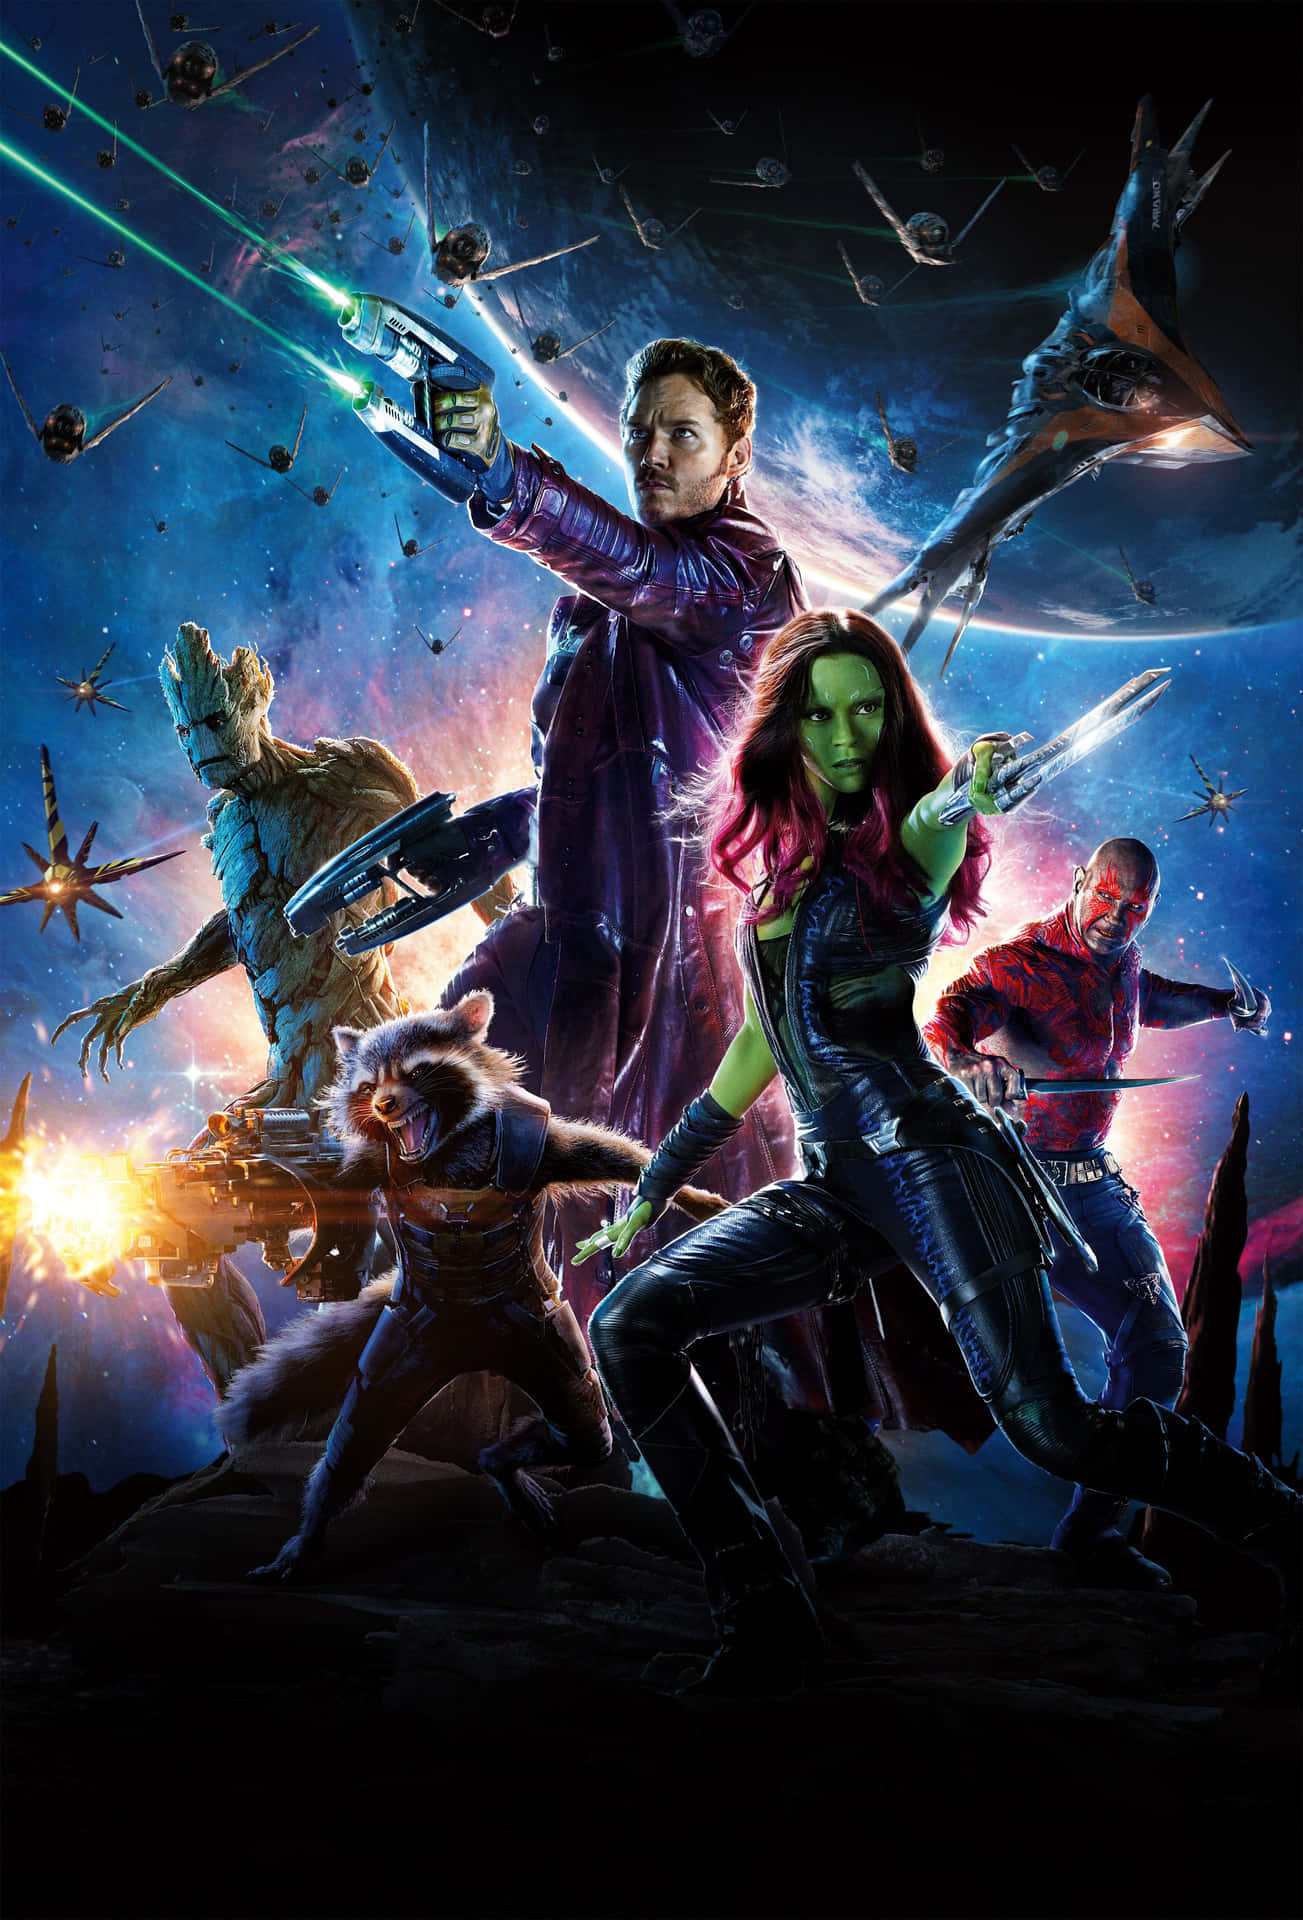 Get Ready for an Epic Adventure with the Guardians of the Galaxy 2 Wallpaper